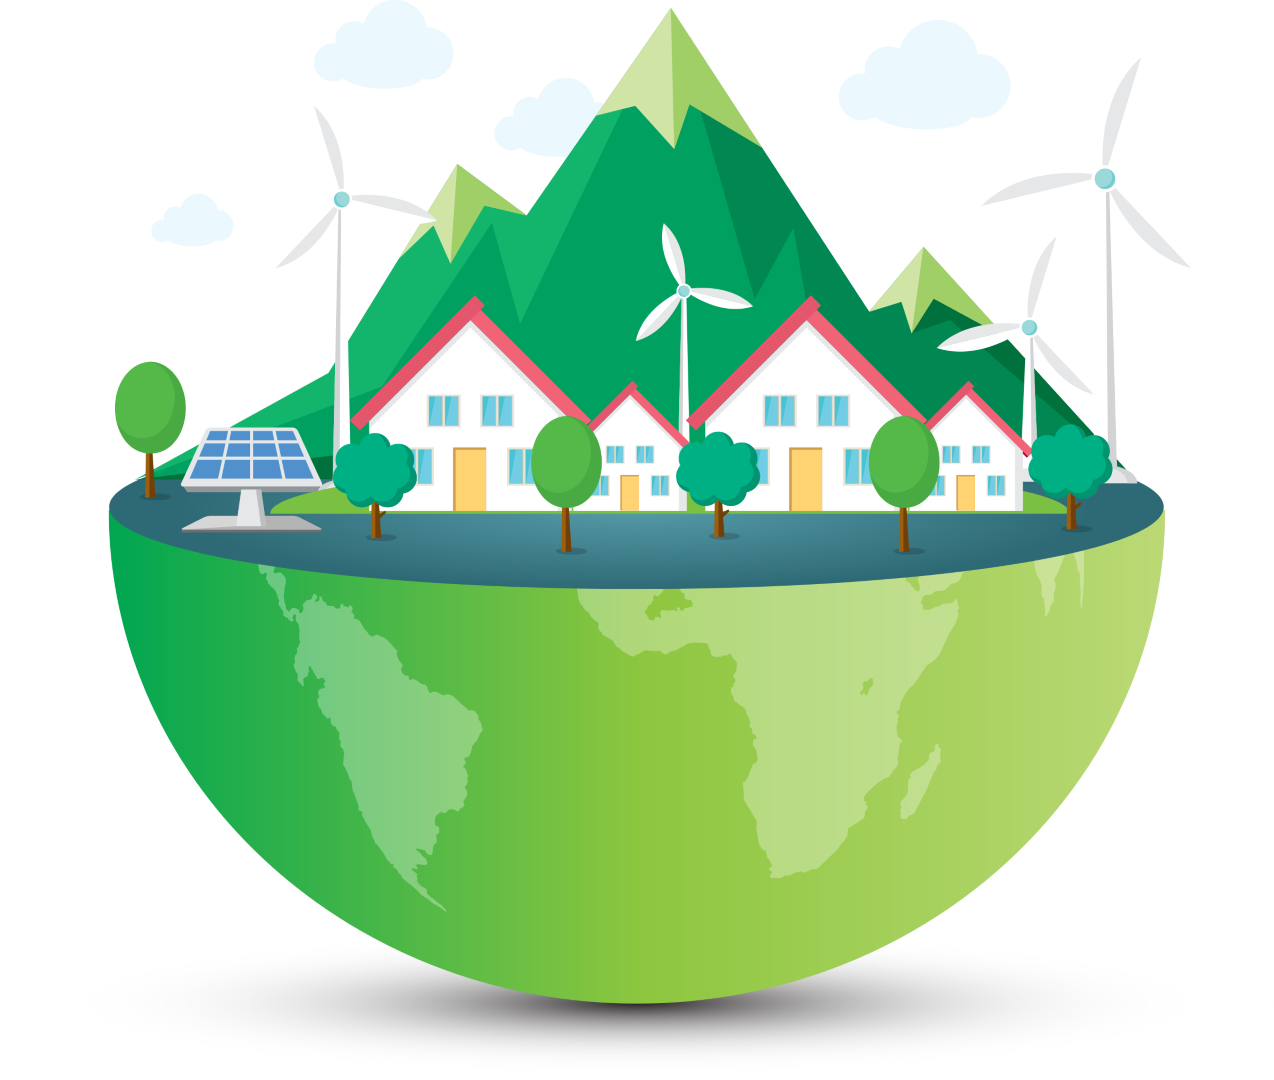 earth with houses on being powered by renewable energy sources